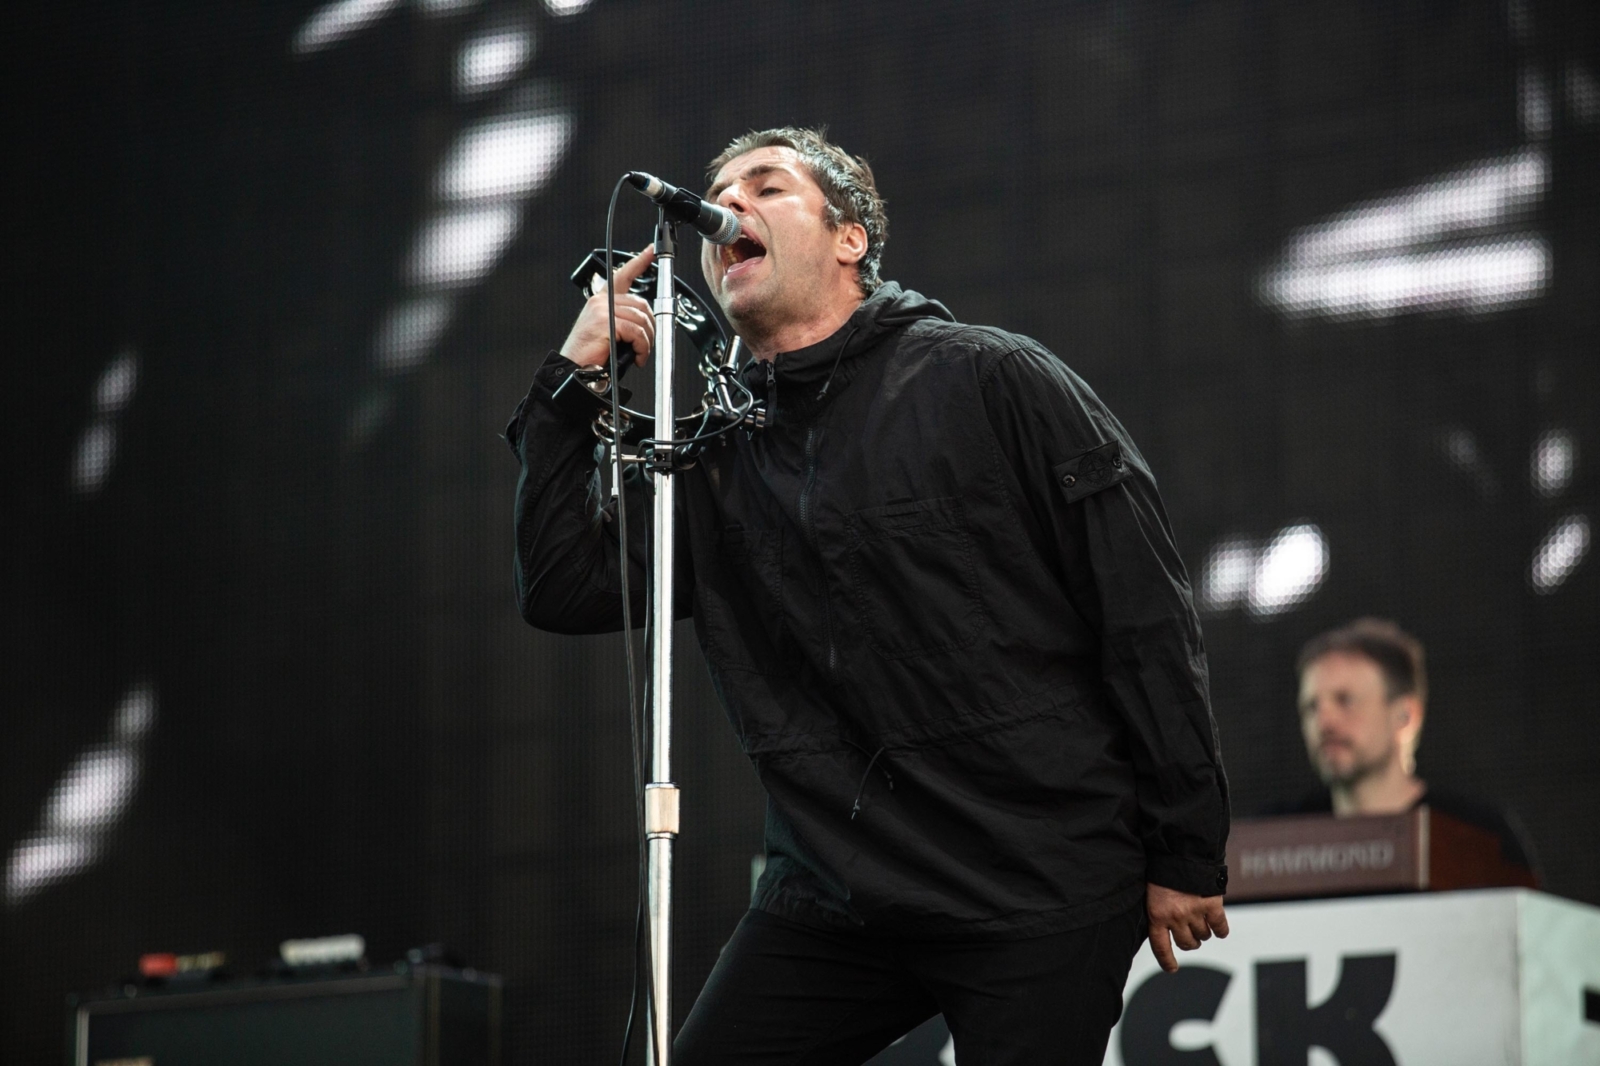 Liam Gallagher set to play Pohoda 2019